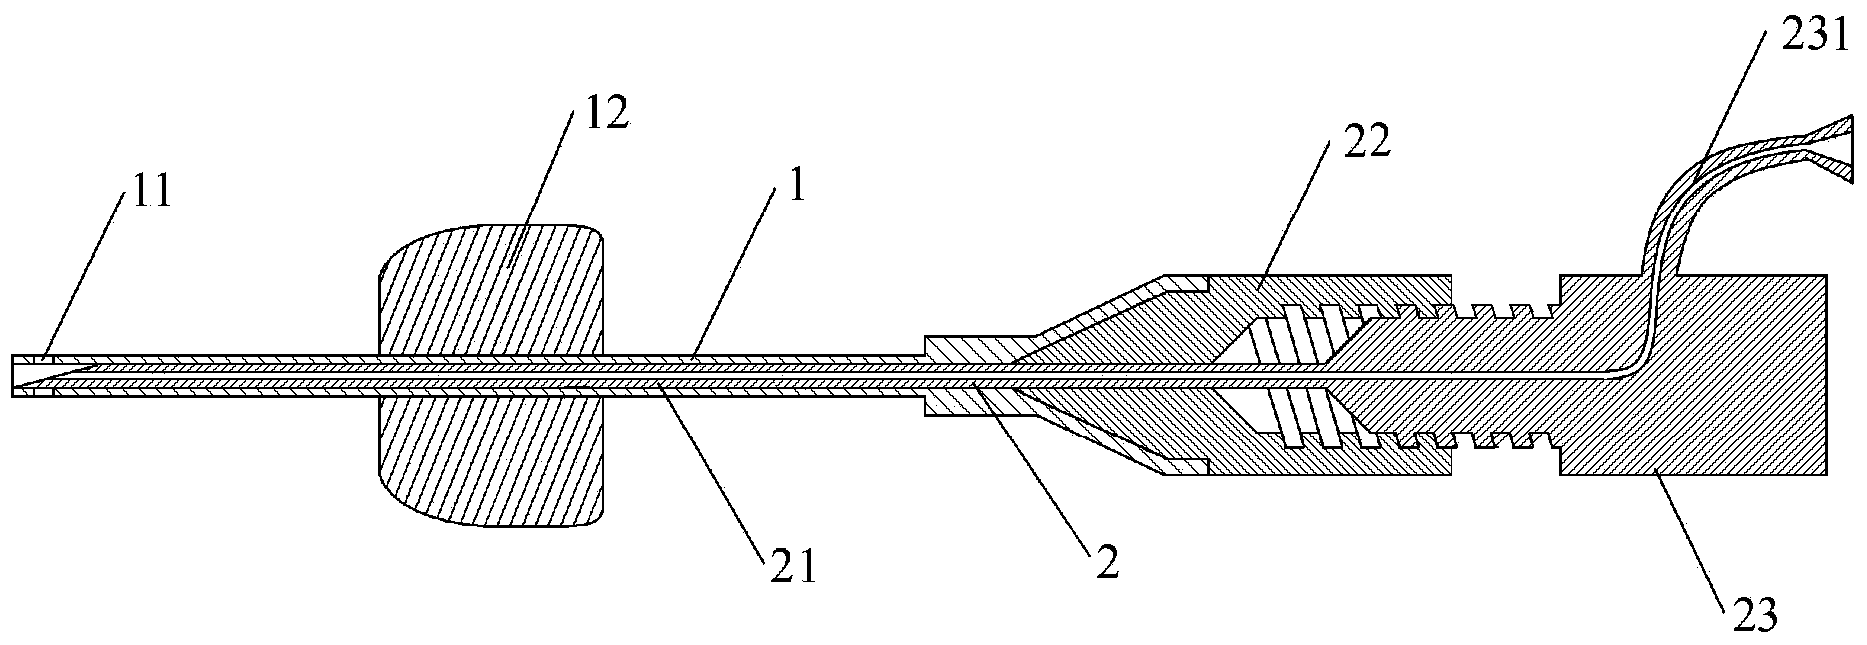 Nerve-blocking puncture catheter needle with adjustable puncture head